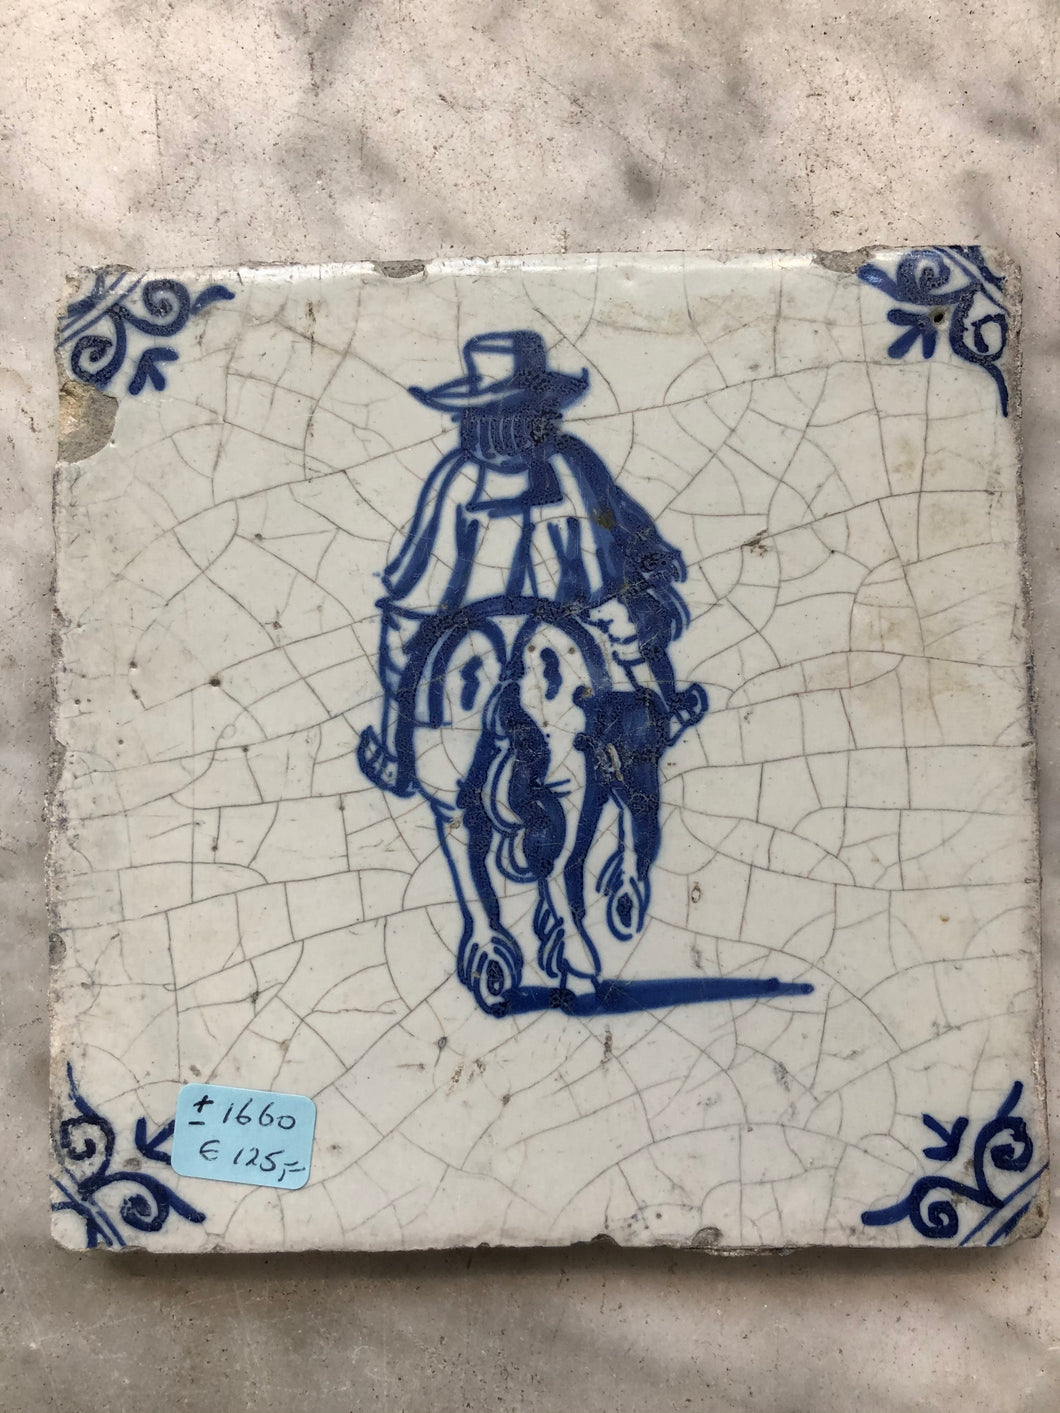 17 th century delft tile with man on horse